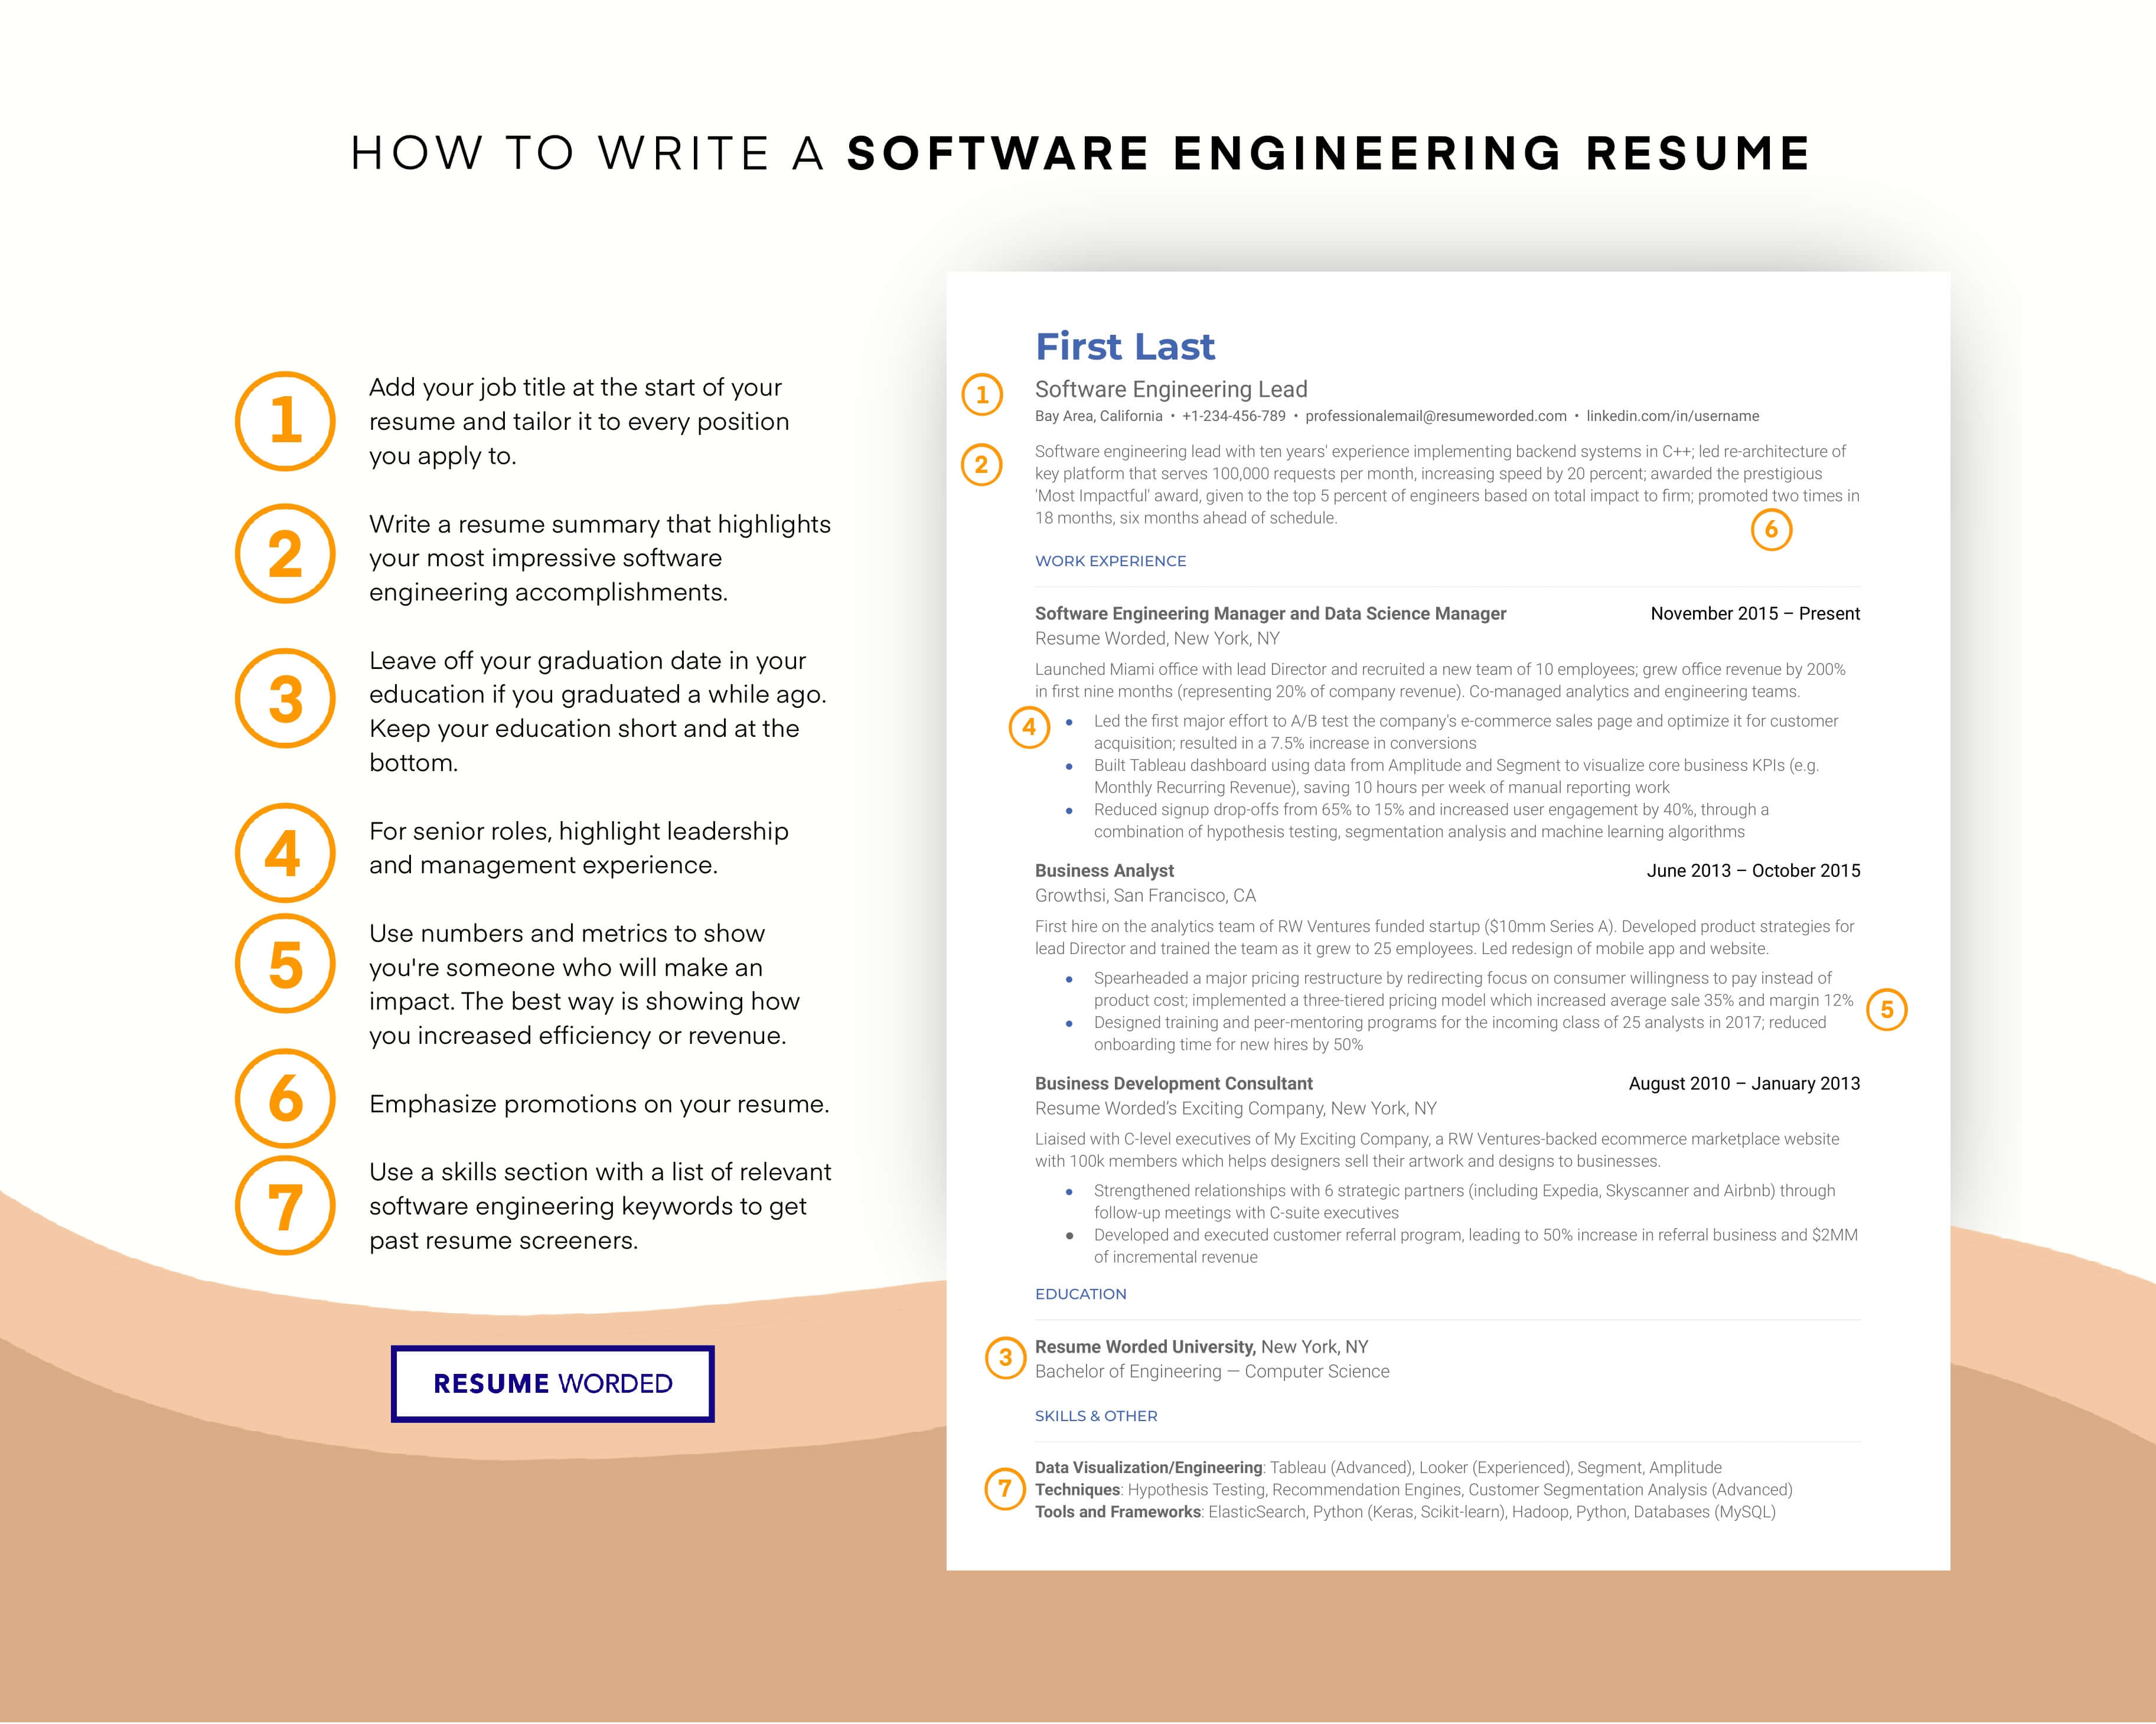 Display a strong foundation in audio software - Entry Level Audio Engineer CV